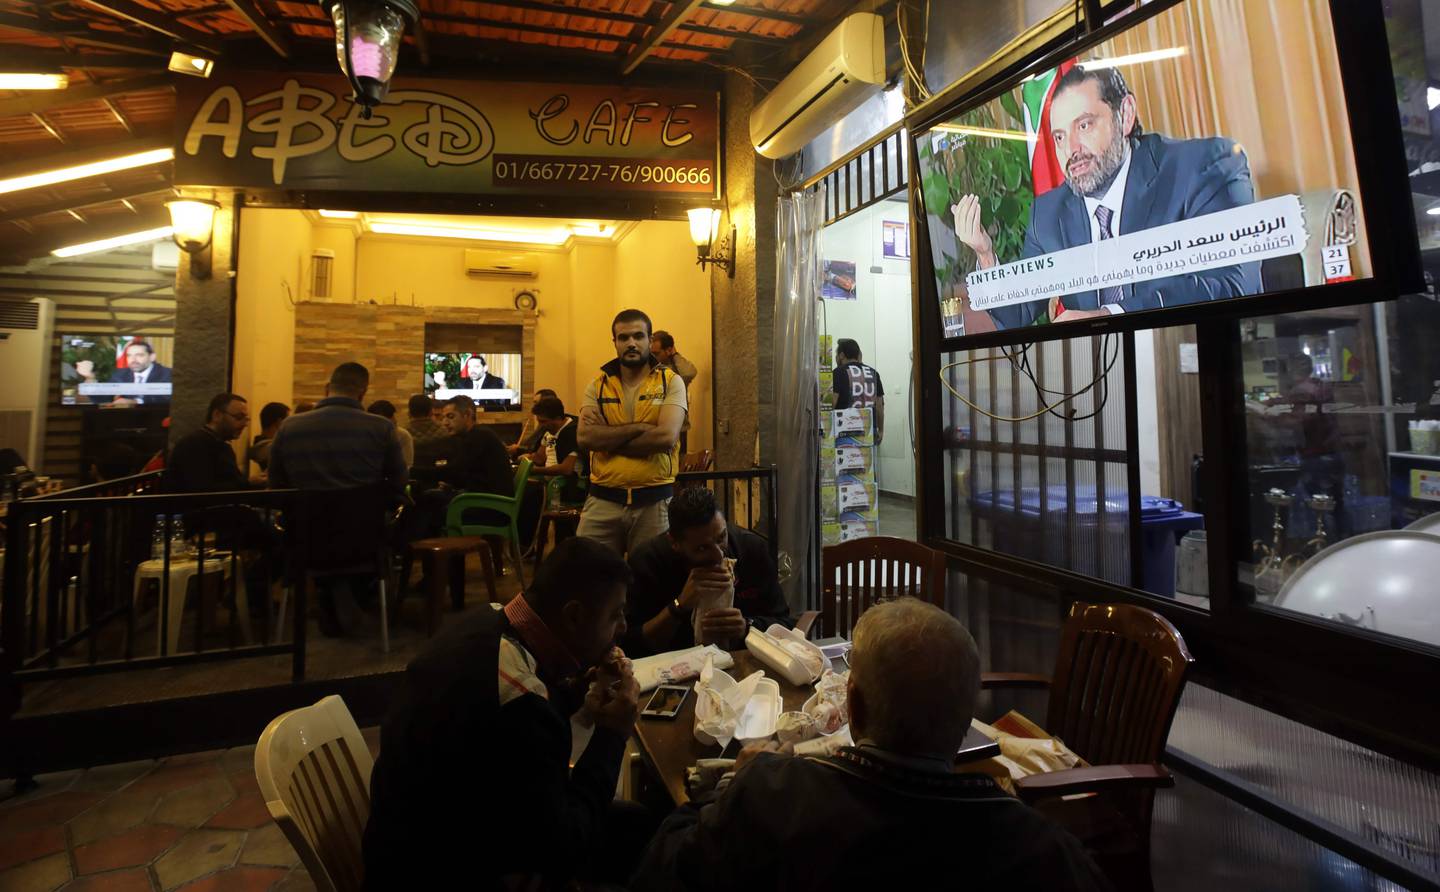 Lebanese watch an interview with Lebanon's resigned prime minister Saad Hariri at a coffee shop in Beirut on November 12, 2017.
Saad Hariri pledged he would return to Lebanon from Saudi Arabia "very soon," in his first television interview since his shock resignation as prime minister eight days ago. / AFP PHOTO / ANWAR AMRO